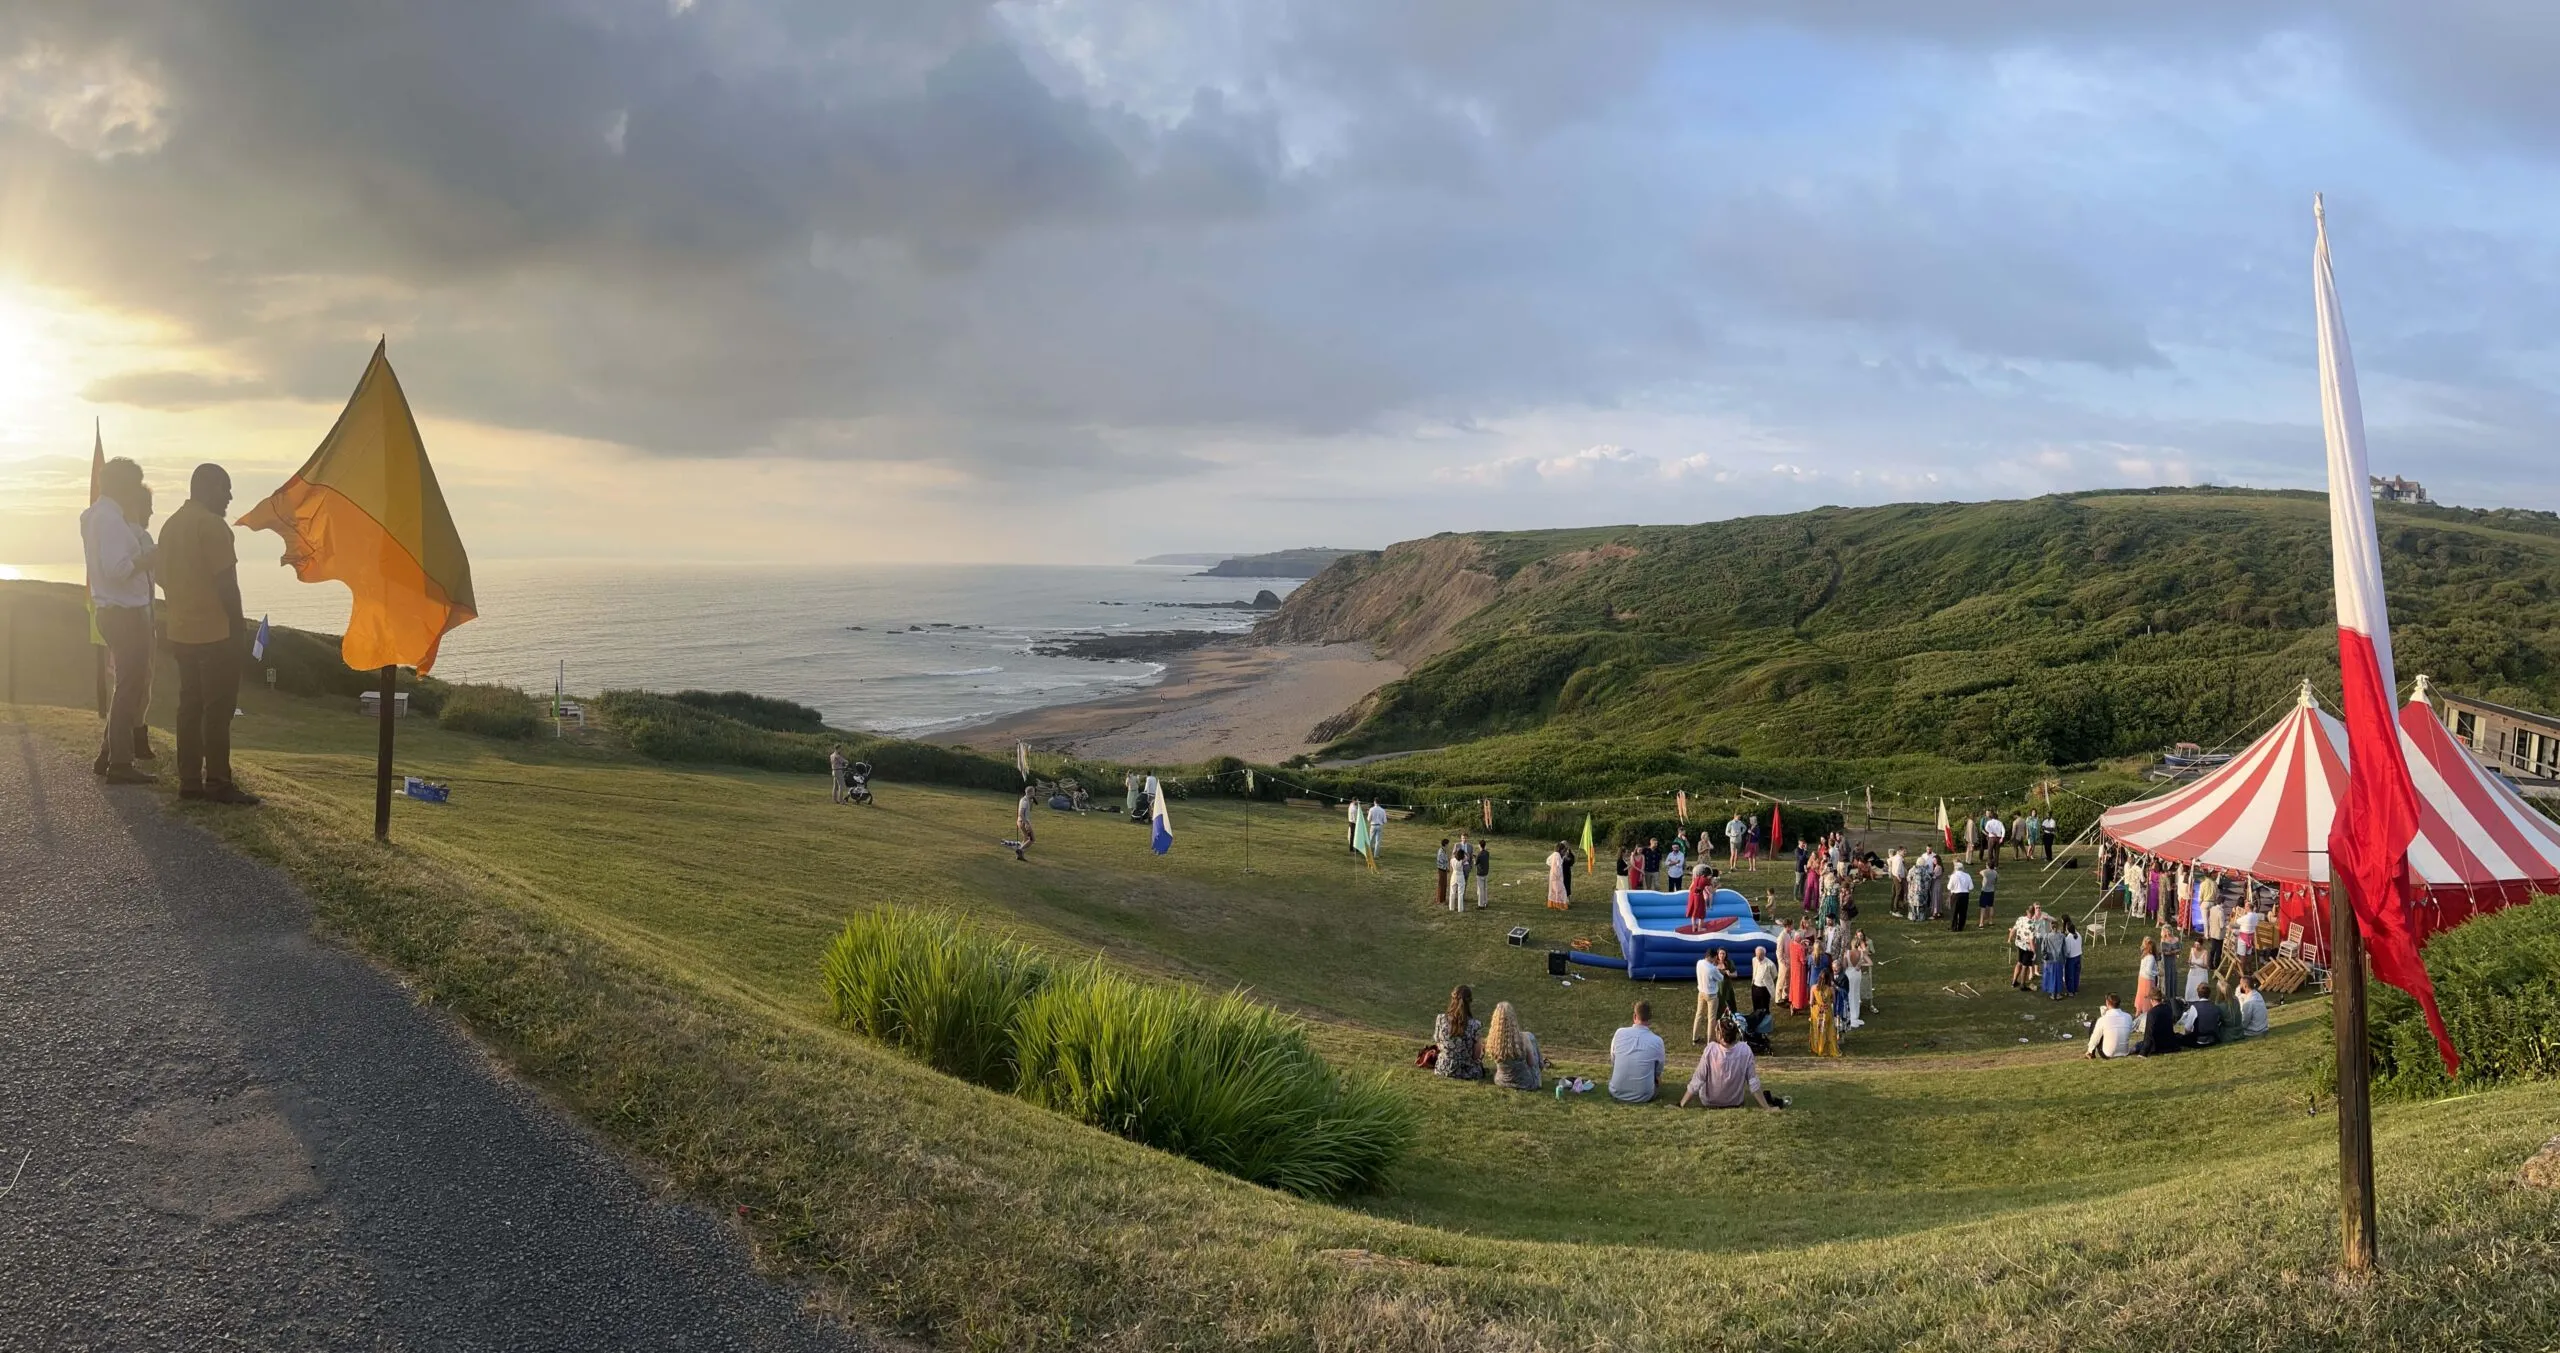 Panoramic picture showing the sea view, beach and large marquee with wedding guests having fun